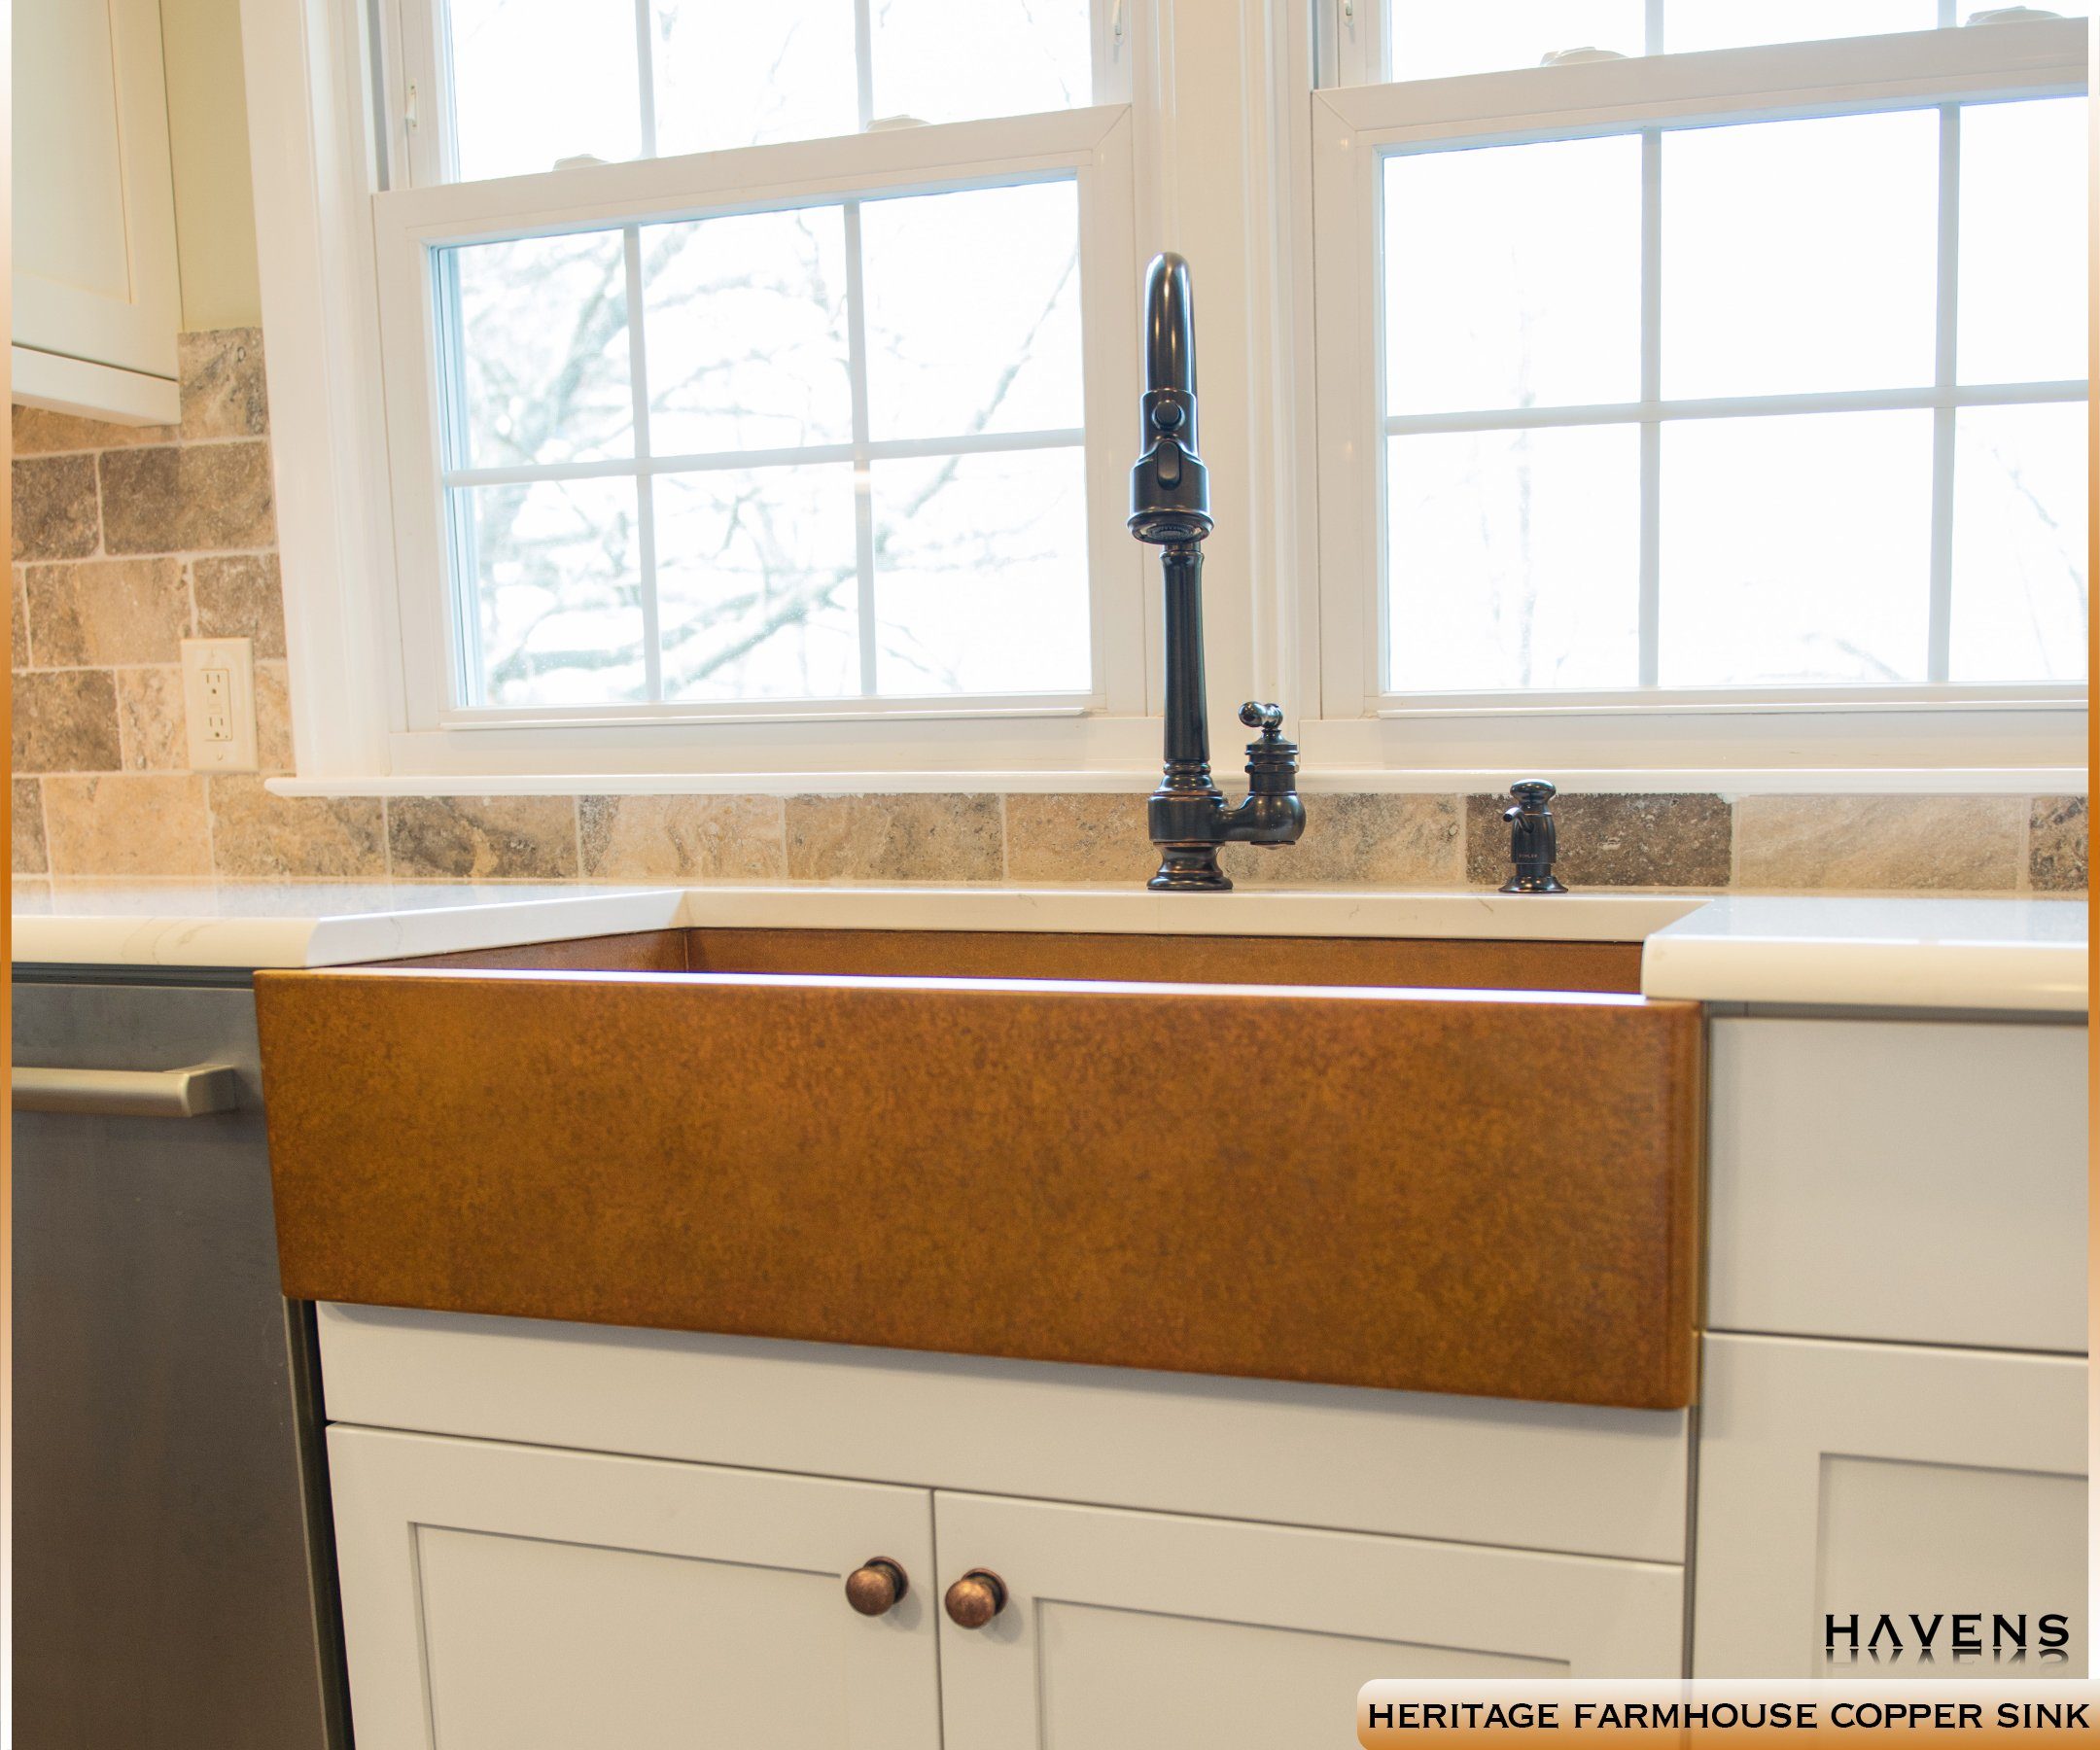 https://cdn.shopify.com/s/files/1/0593/8148/1631/products/heritage-heritage-copper-farmhouse-sink-2_2160x1800.jpg?v=1699471636